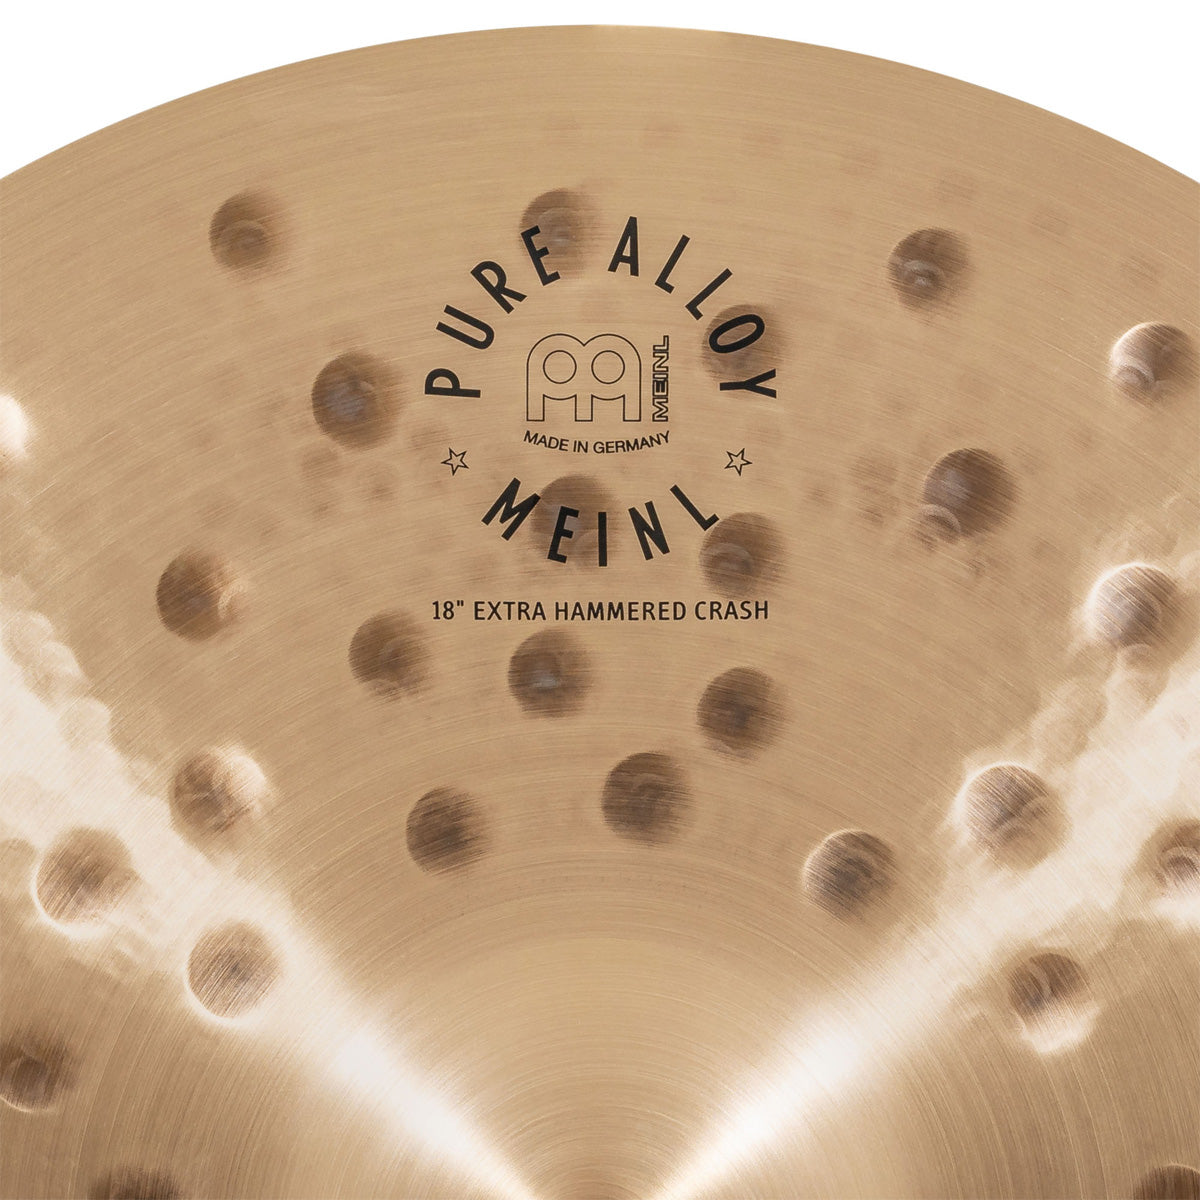 Meinl Pure Alloy 18" Extra Hammered Crash Cymbal